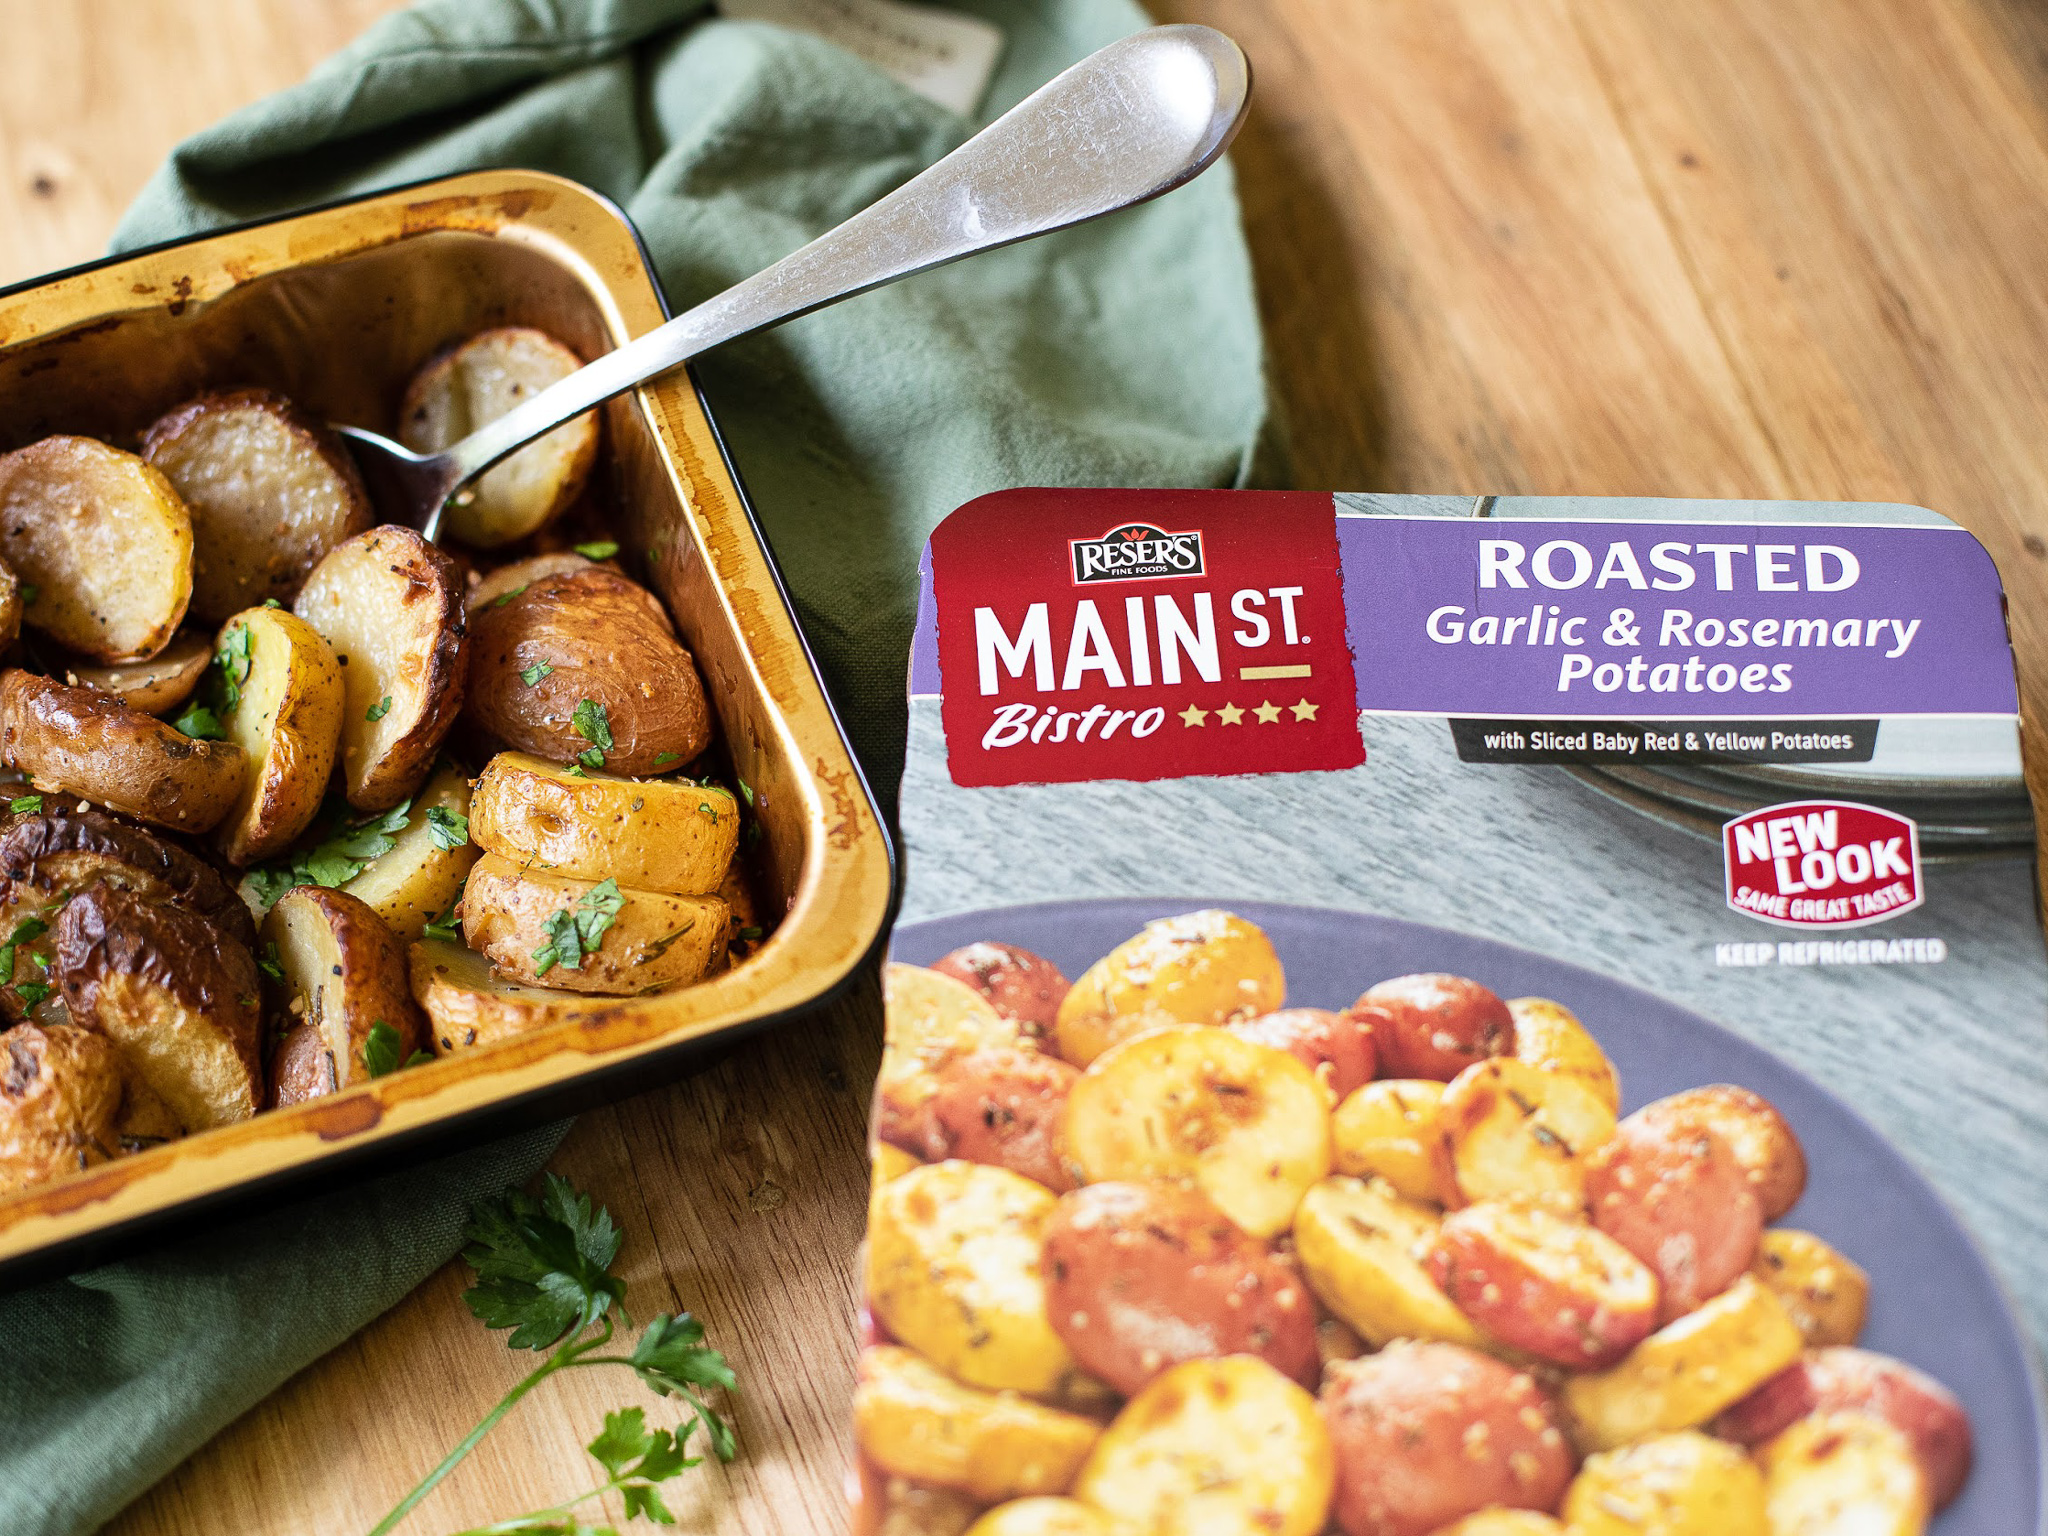 Reser’s Main St. Bistro Baked Or Classic Sides Just $3.50 At Publix